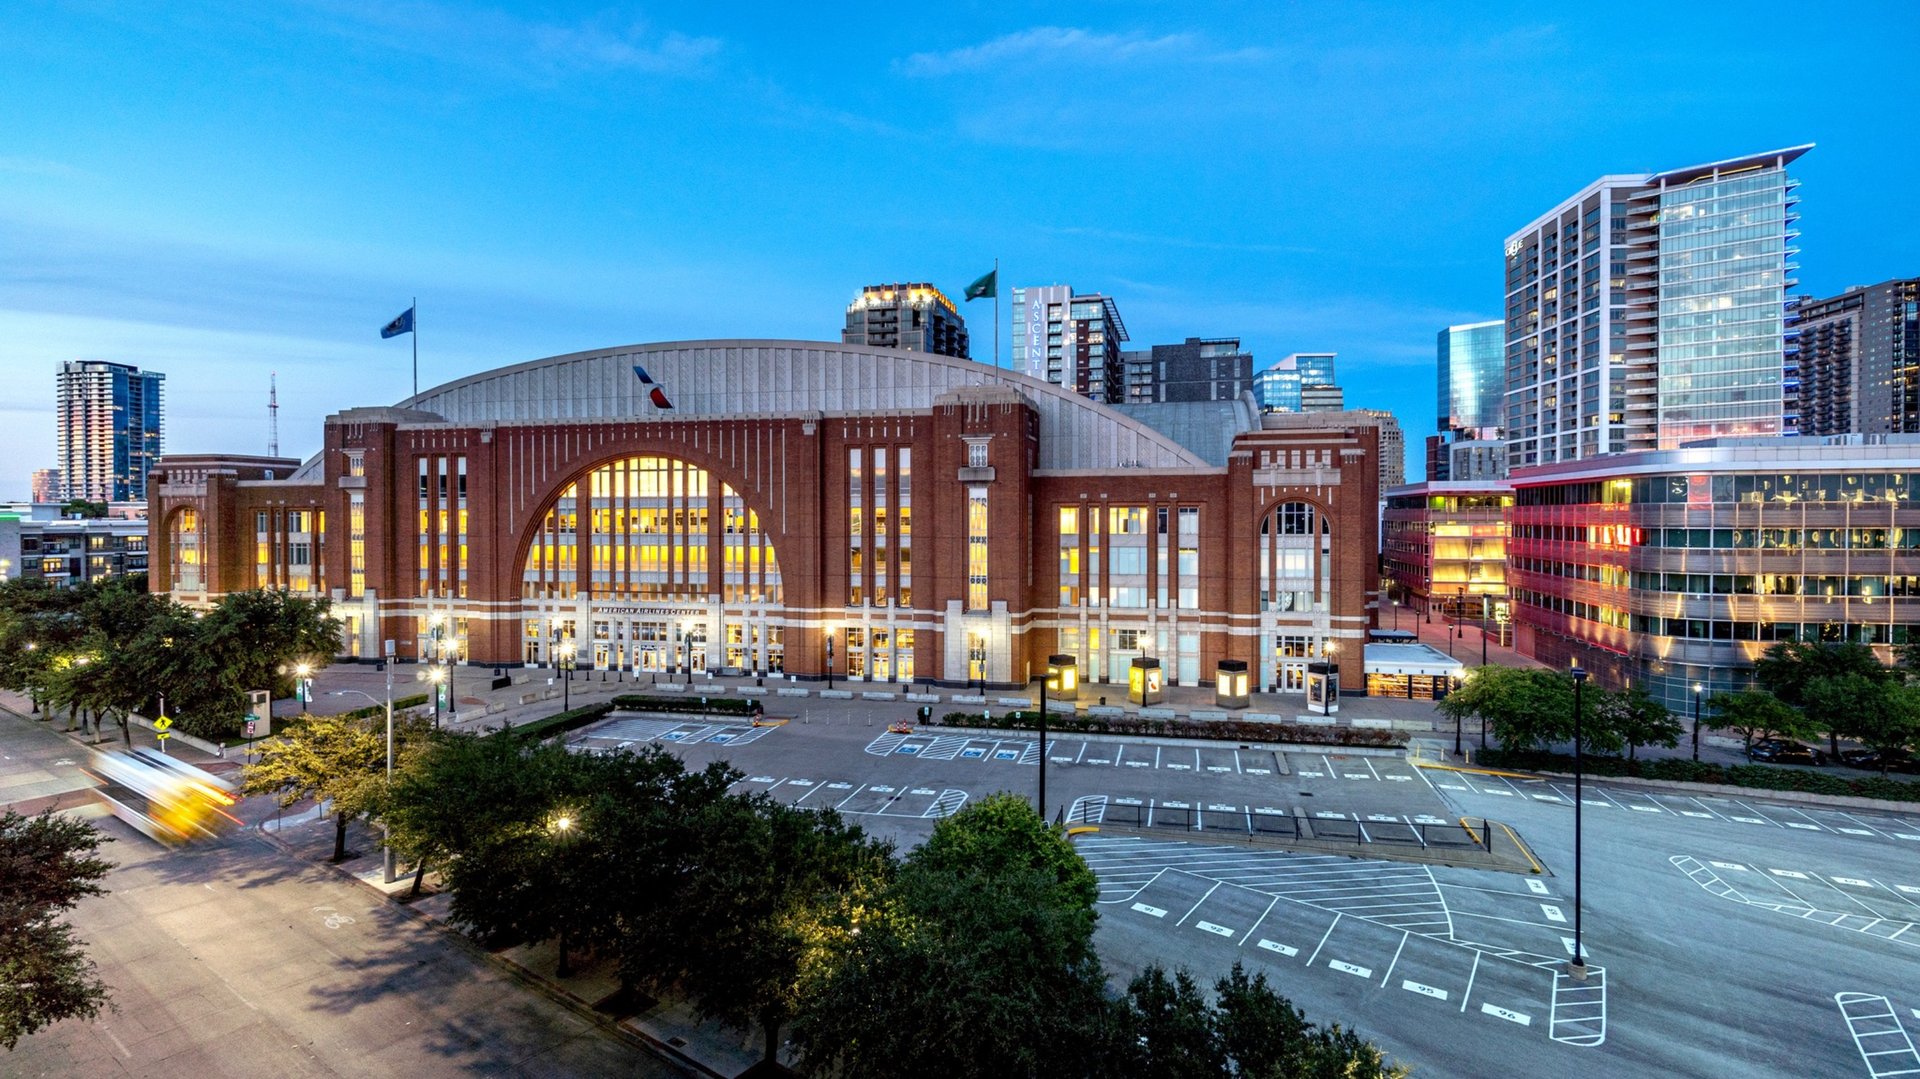 American Airlines Center – Todays DFW